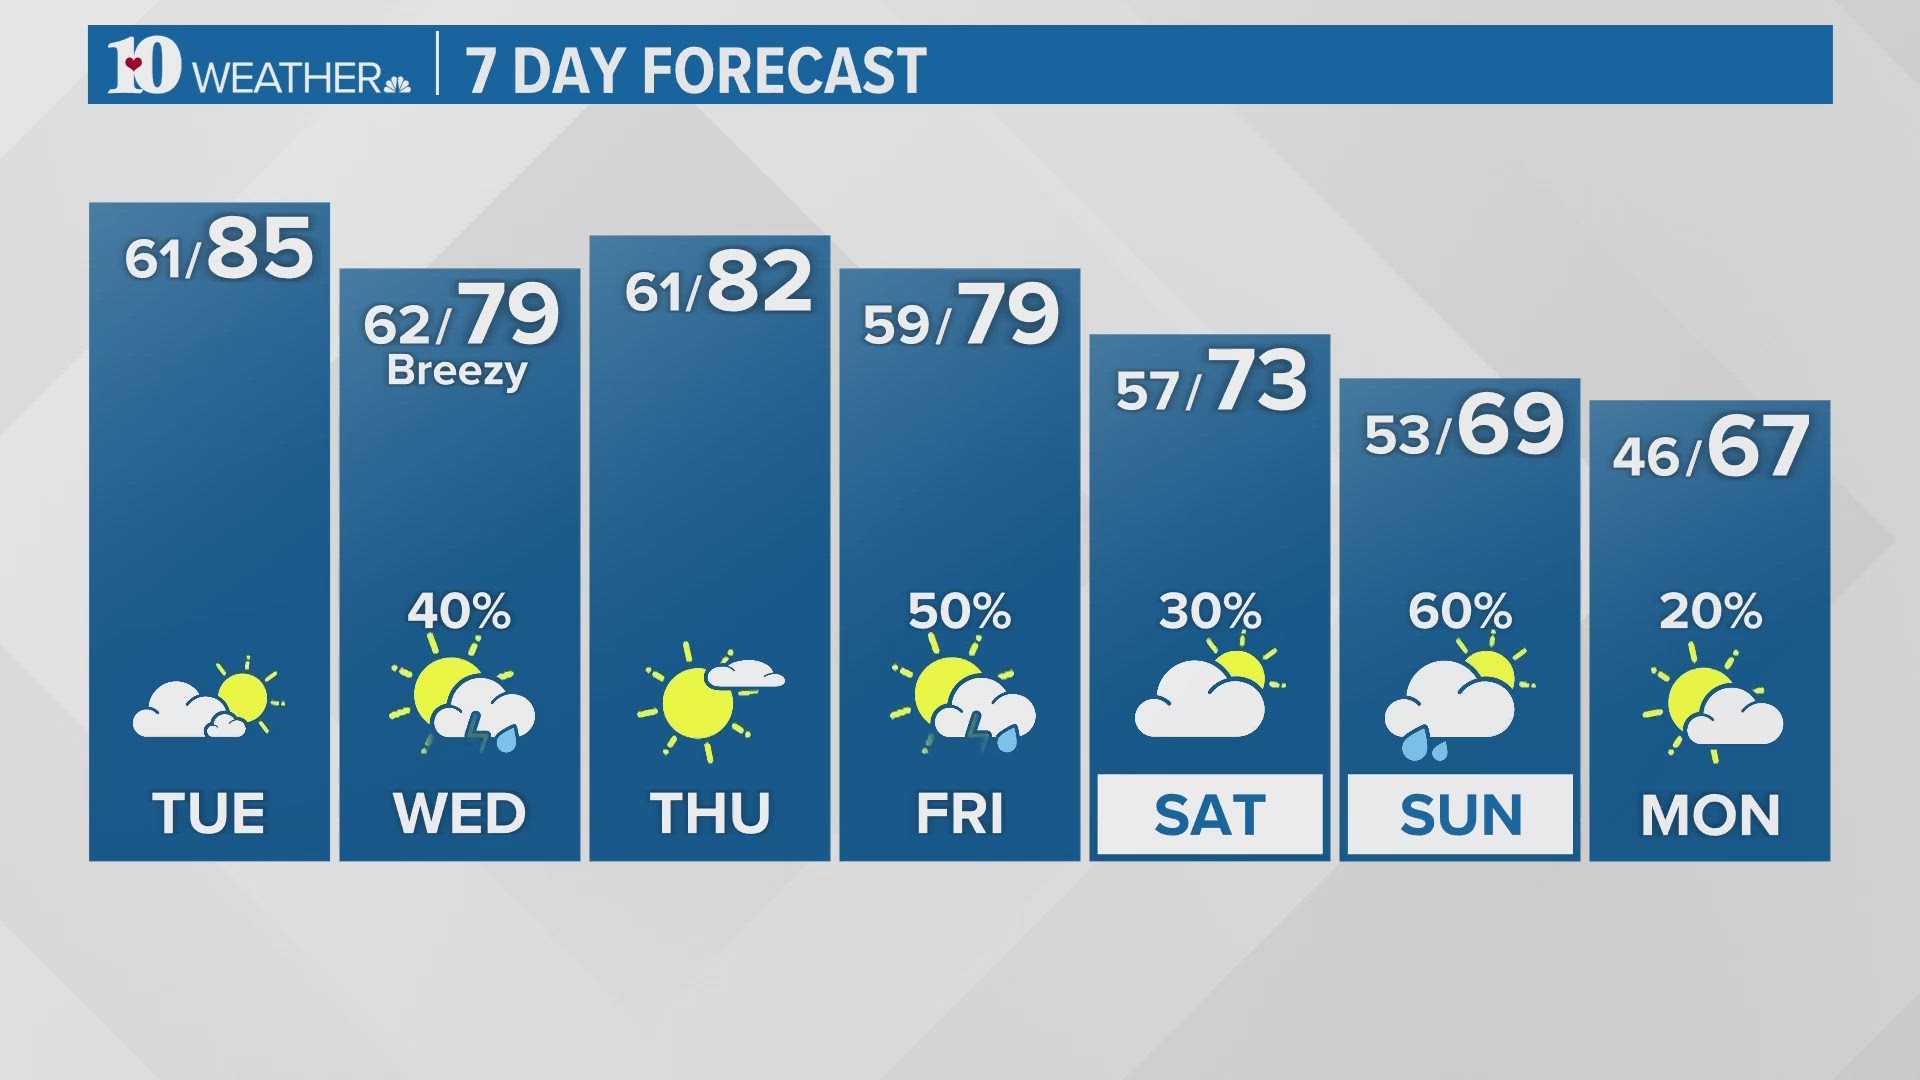 A chance for scattered thundershowers mid-week, with another chance coming up Friday to end the week.